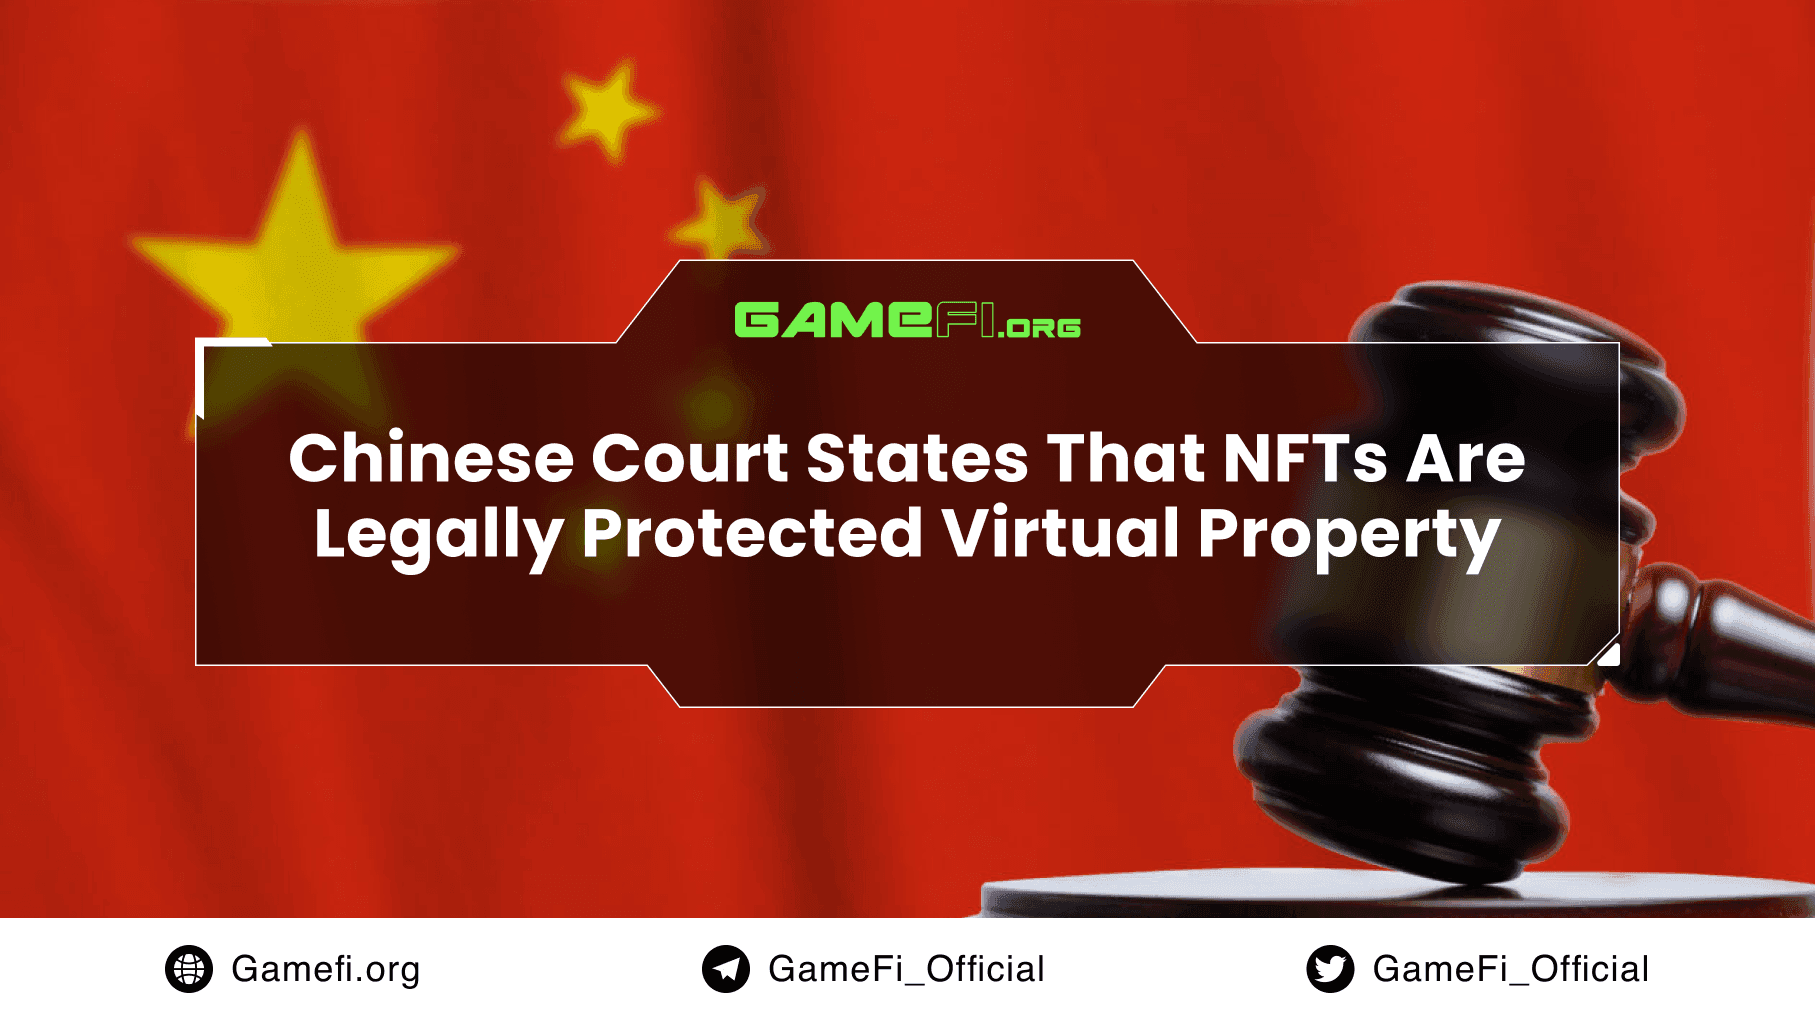 Chinese Court States That NFTs are Legally Protected Virtual Property